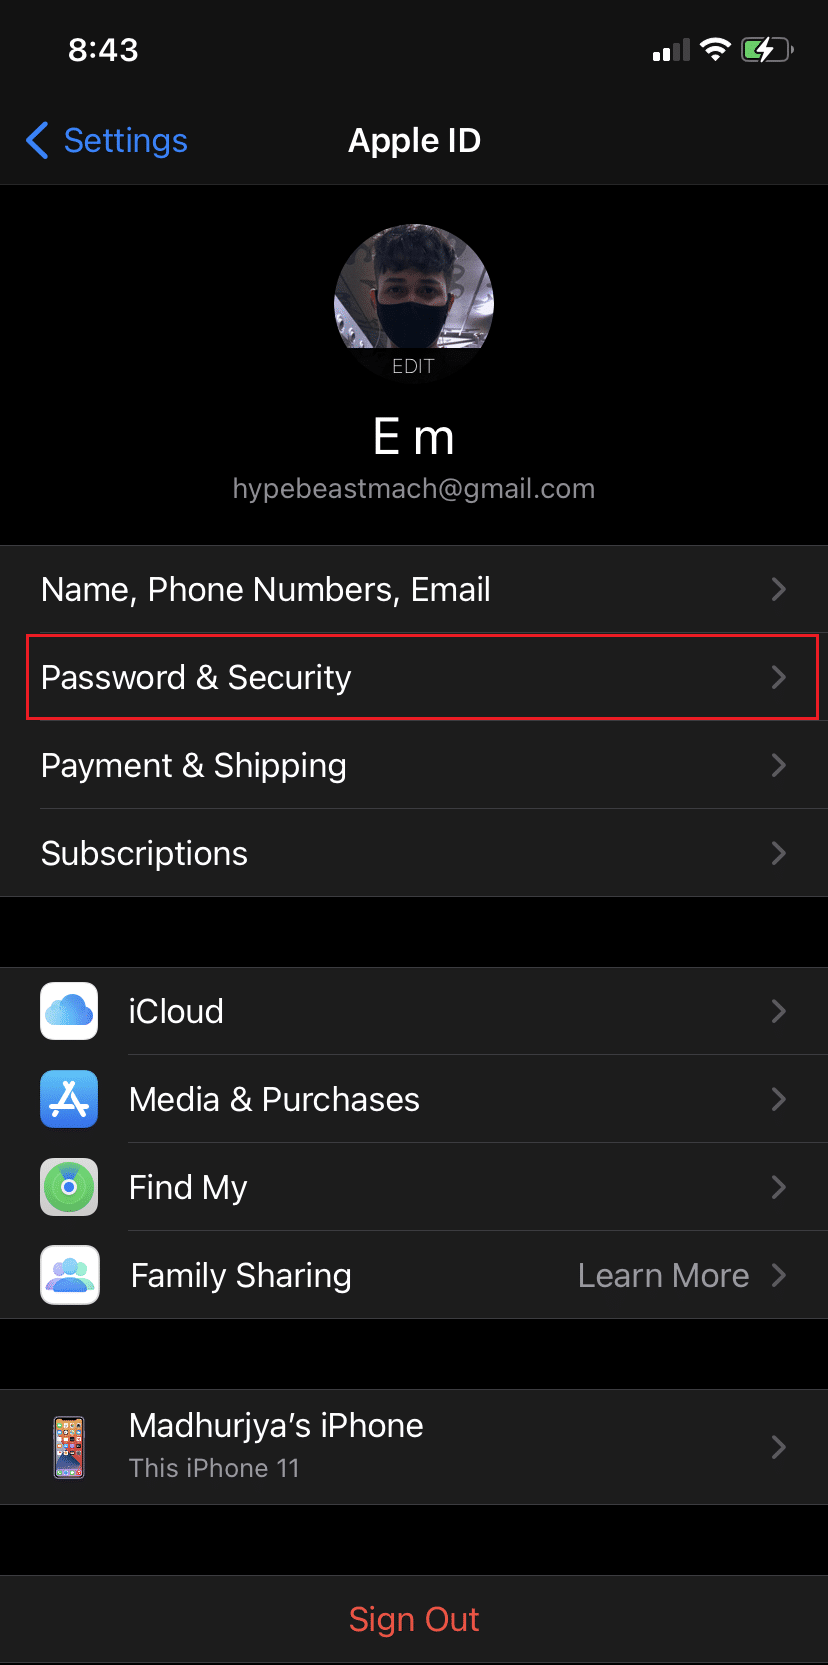 Tap on Password & Security